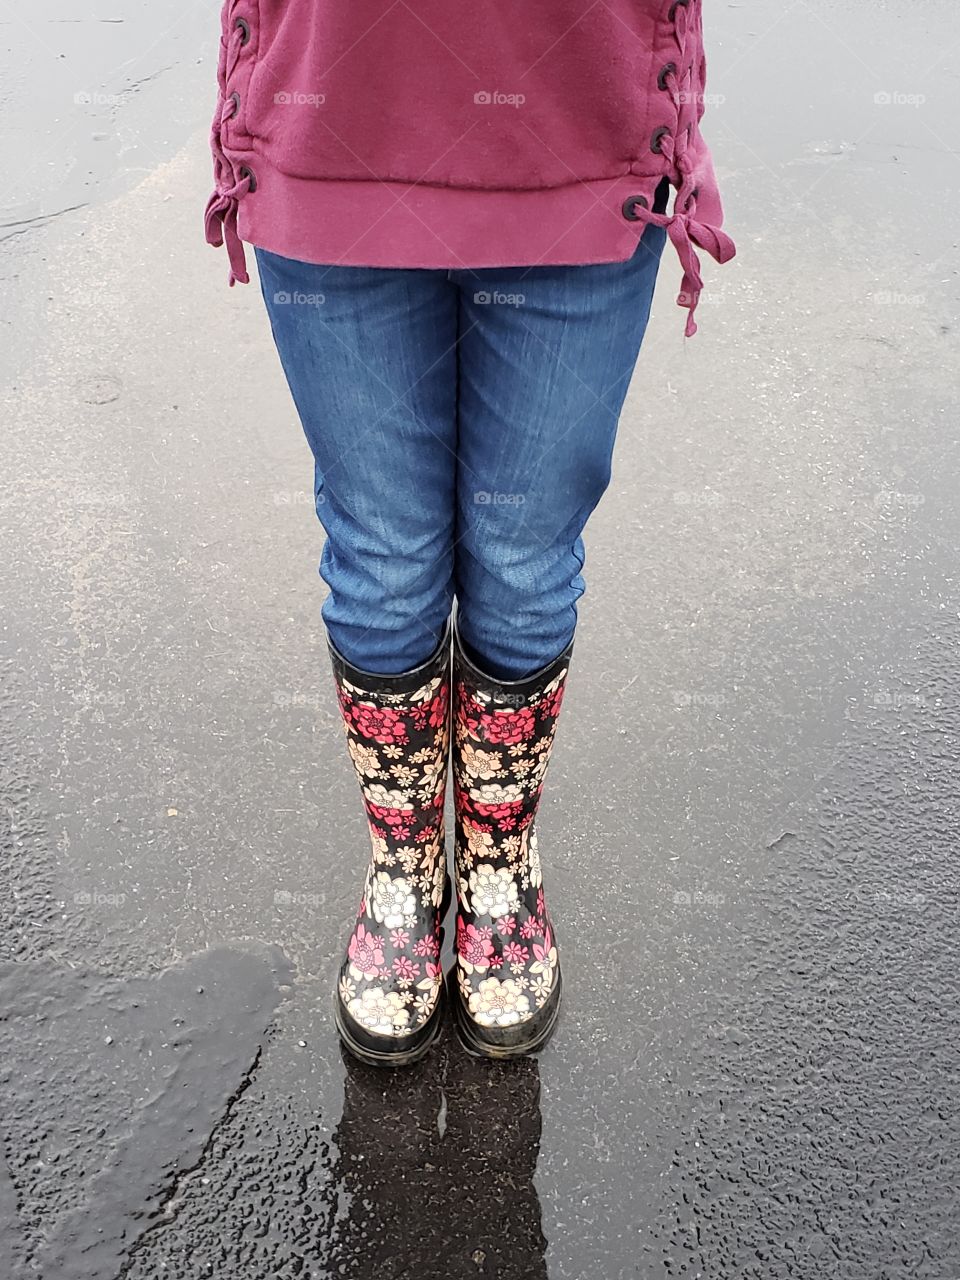 Rainboots in a puddle